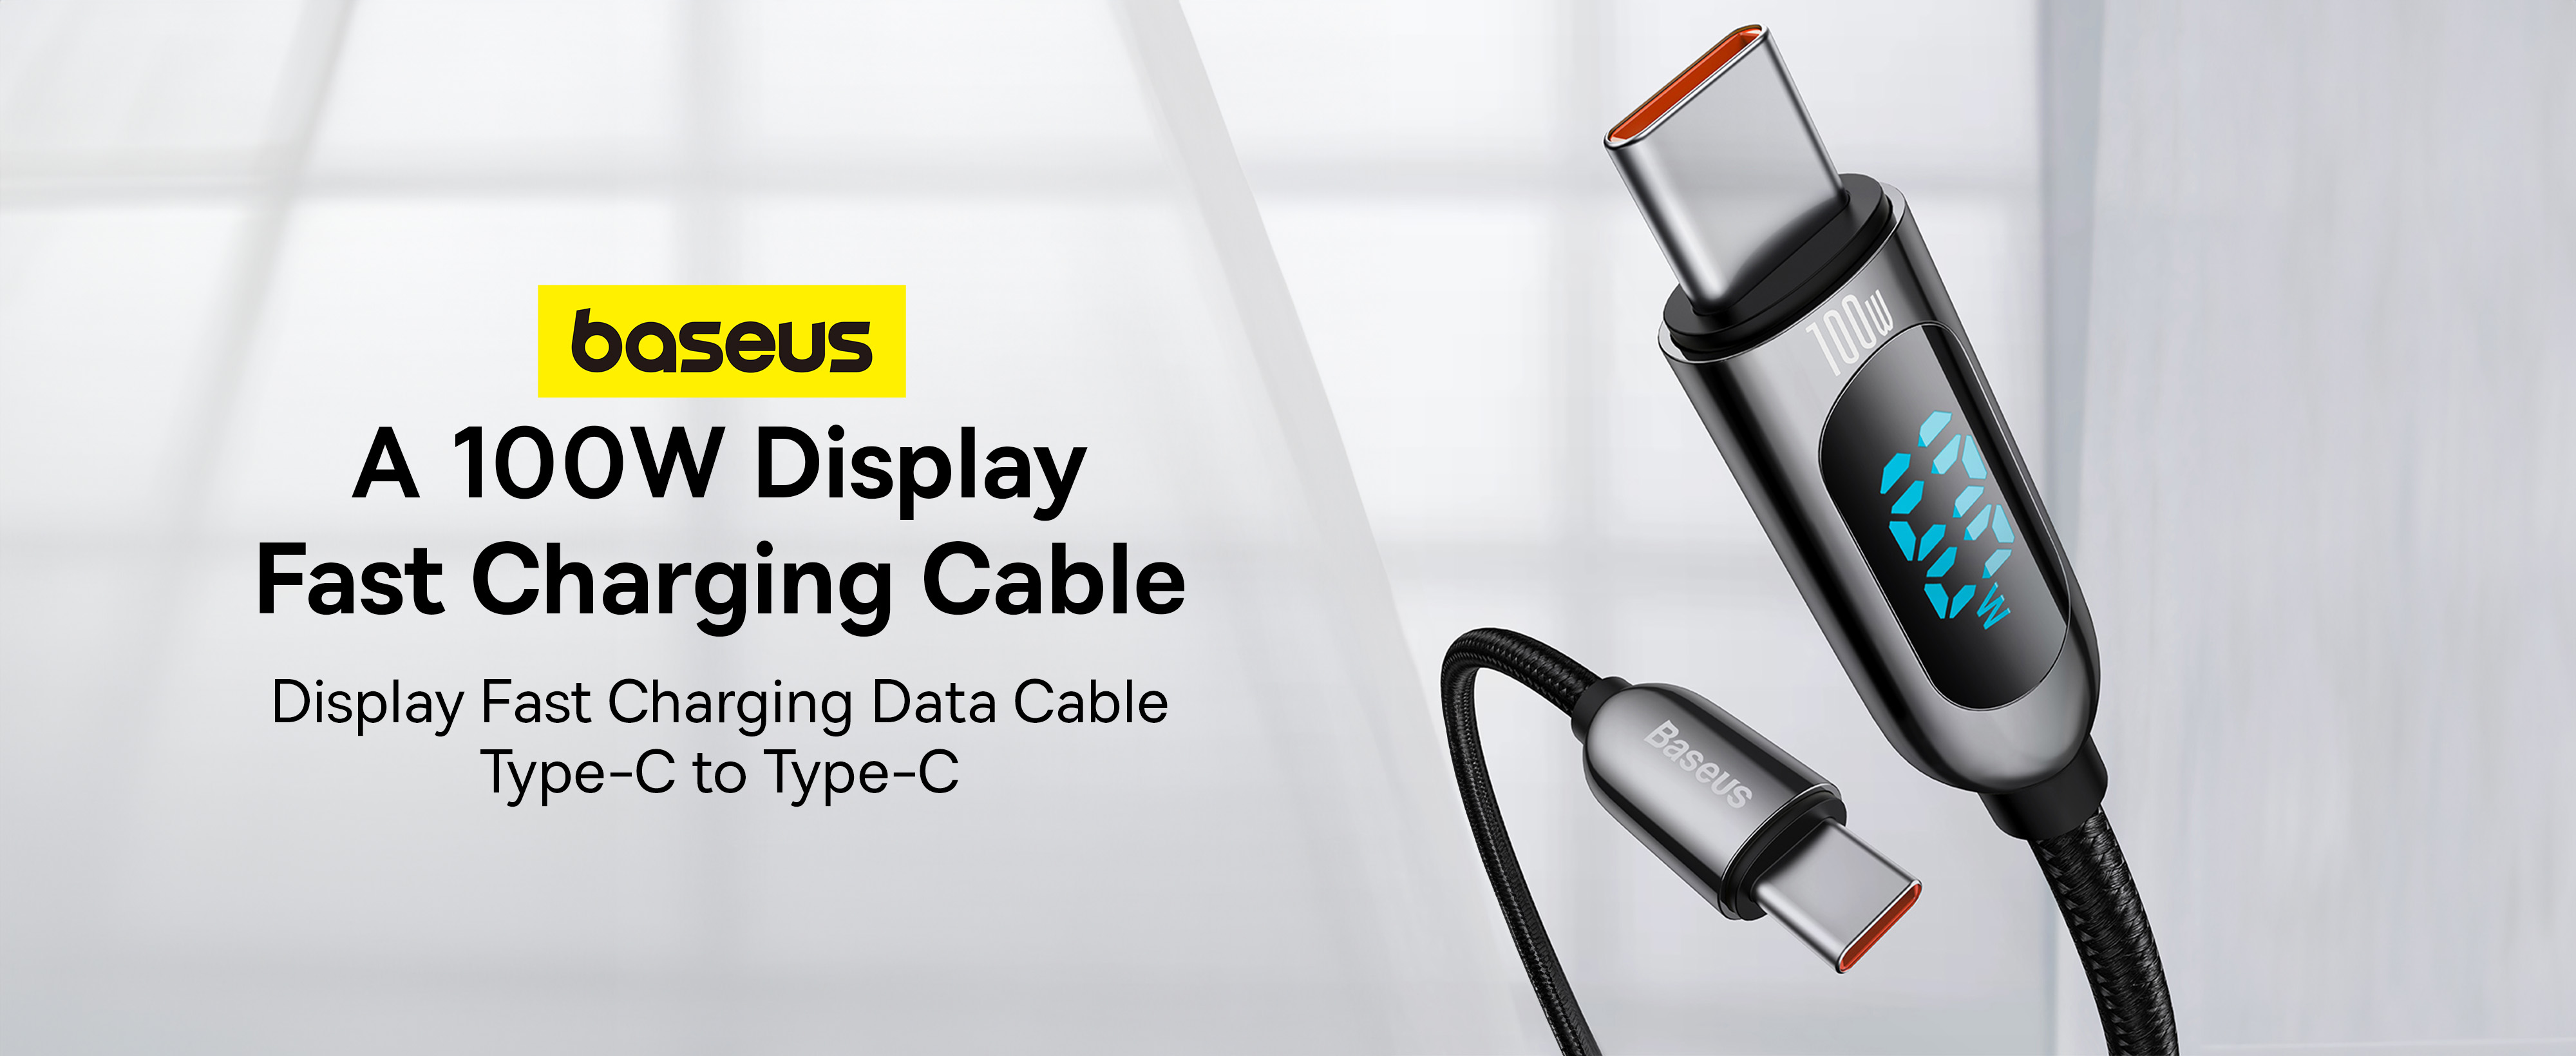 Baseus Display Fast Charging Data Cable Type-C to Type-C 100W (2m) Black